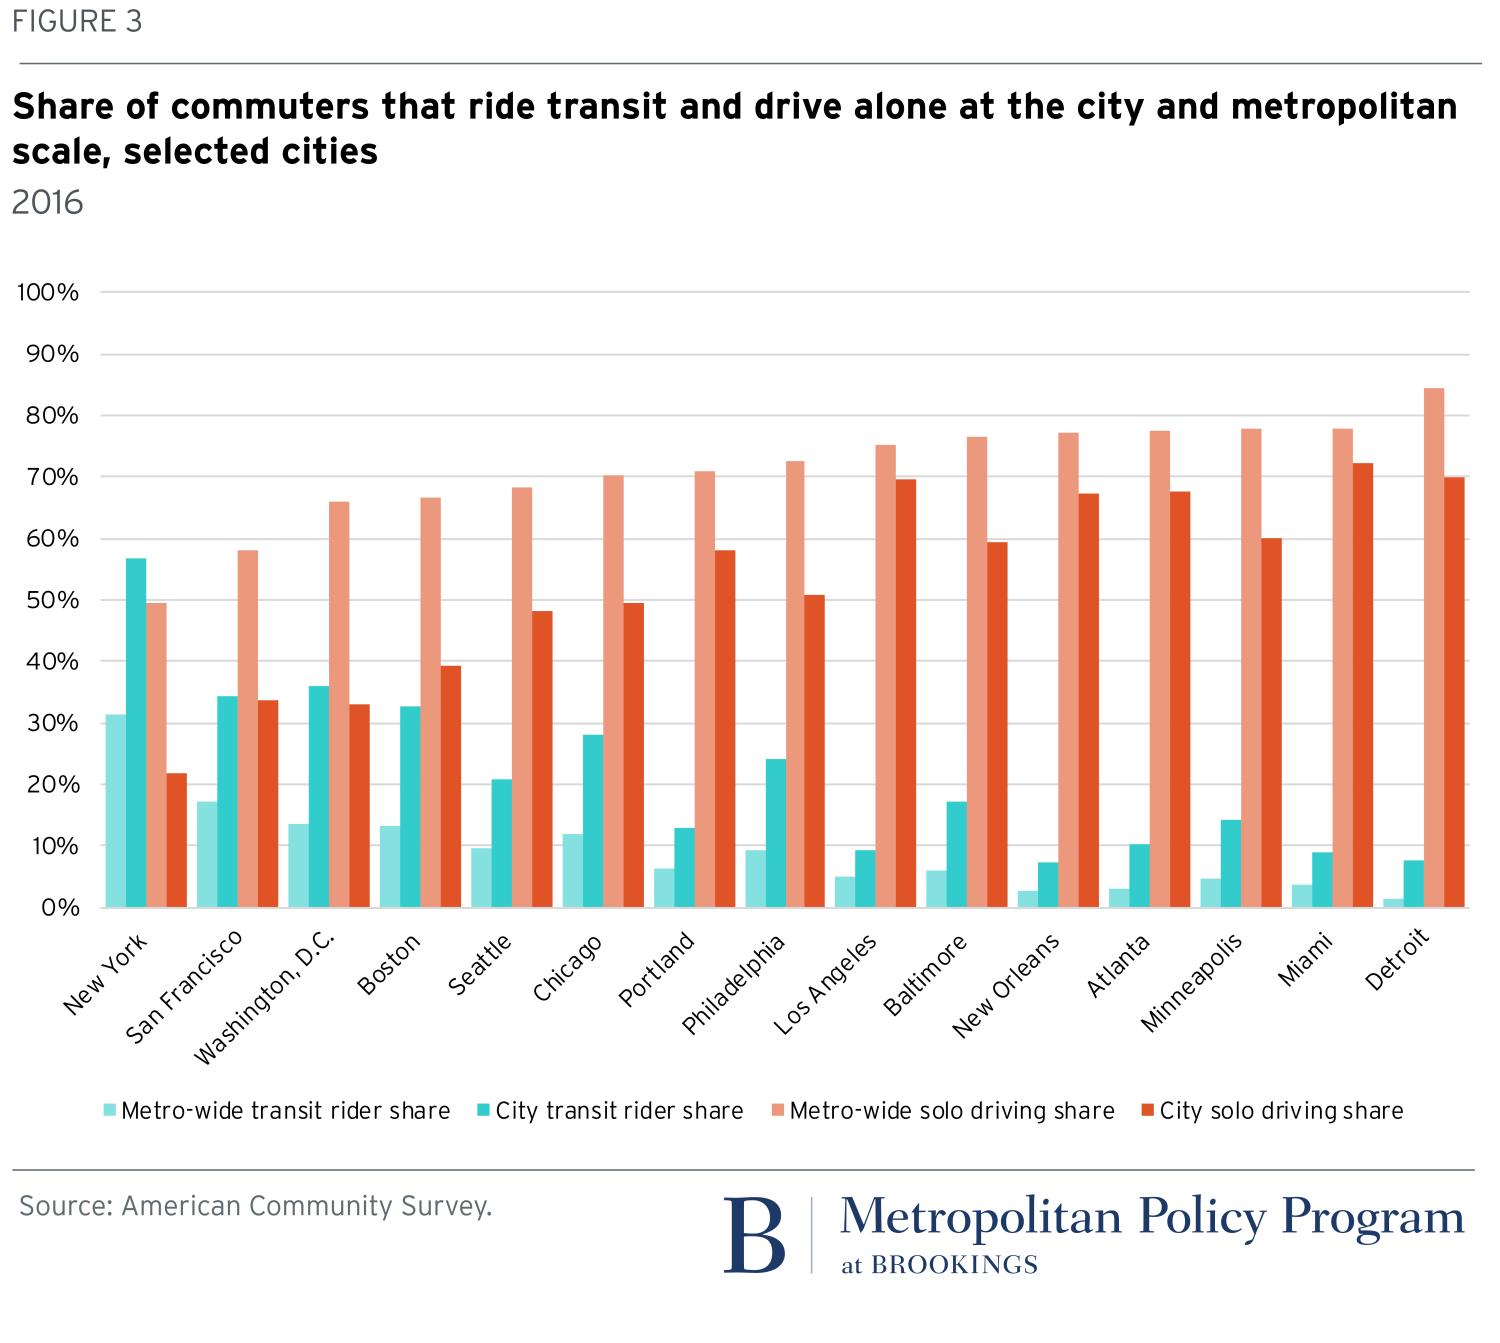 Figure 3: Share of commuters that ride transit and drive alone at the city and metropolitan scale, selected cities